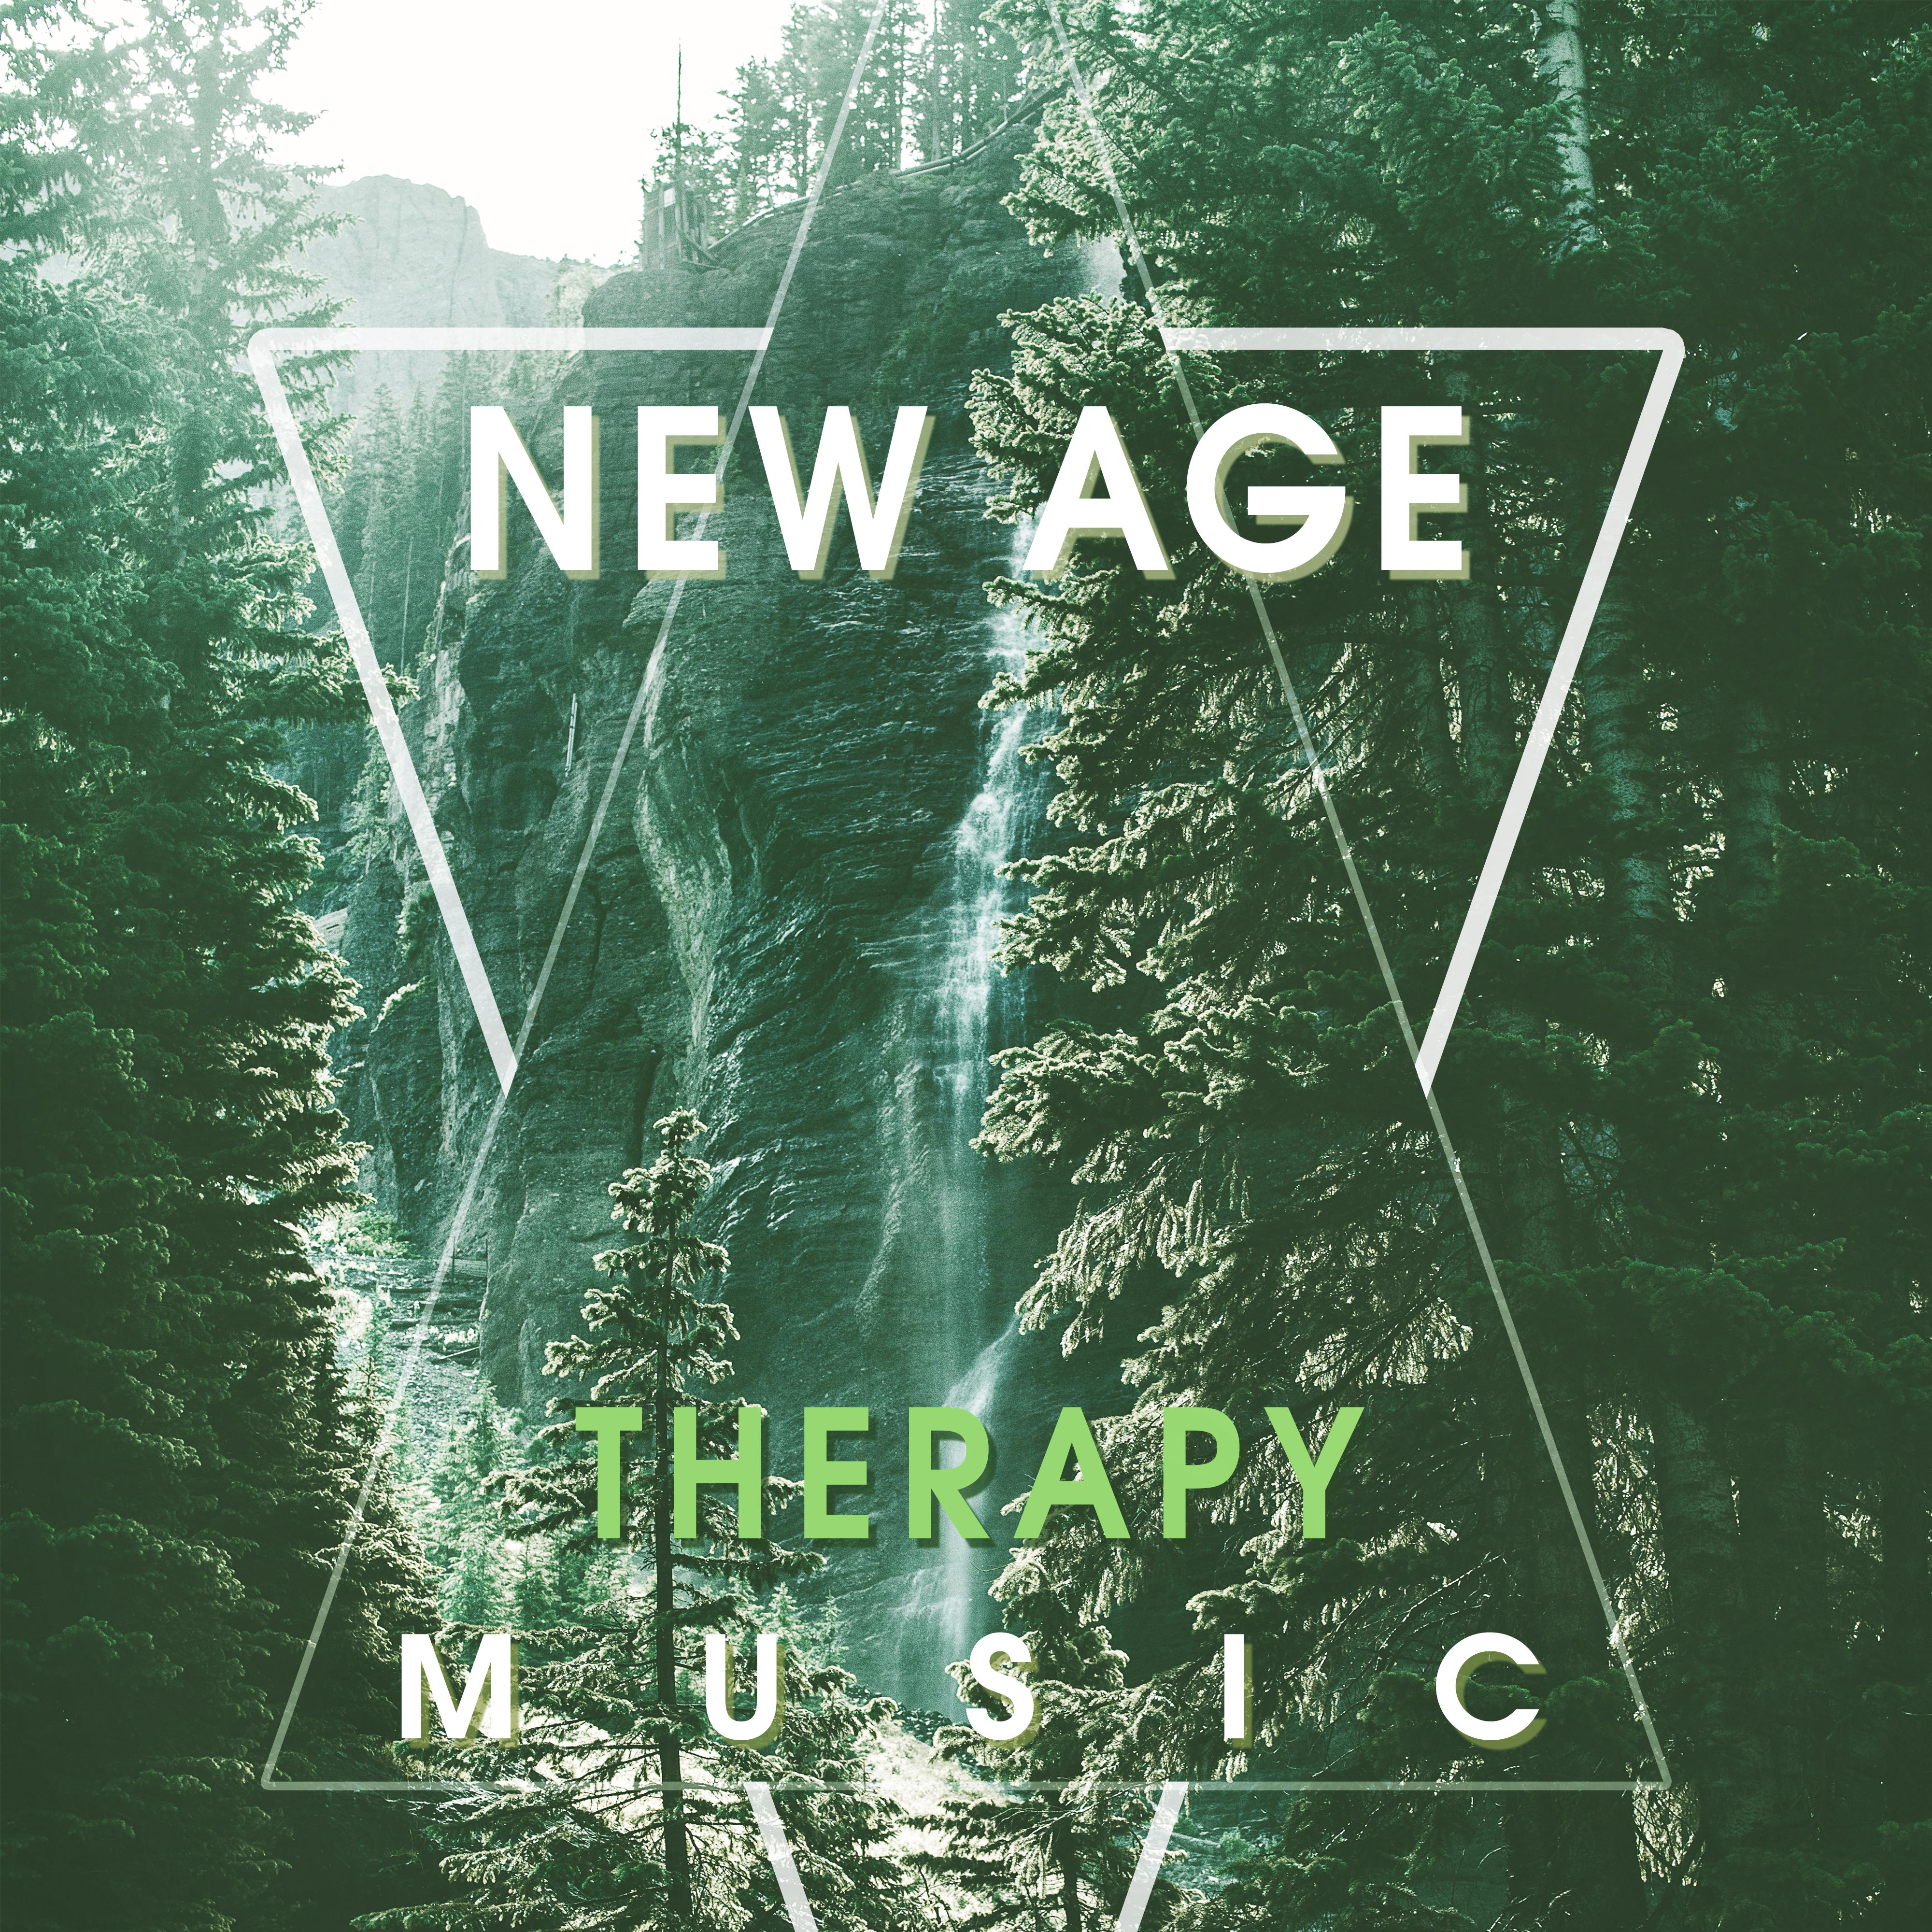 New Age Therapy Music – Relaxing Music, Calming Songs of Nature, Rest, Harmony Life